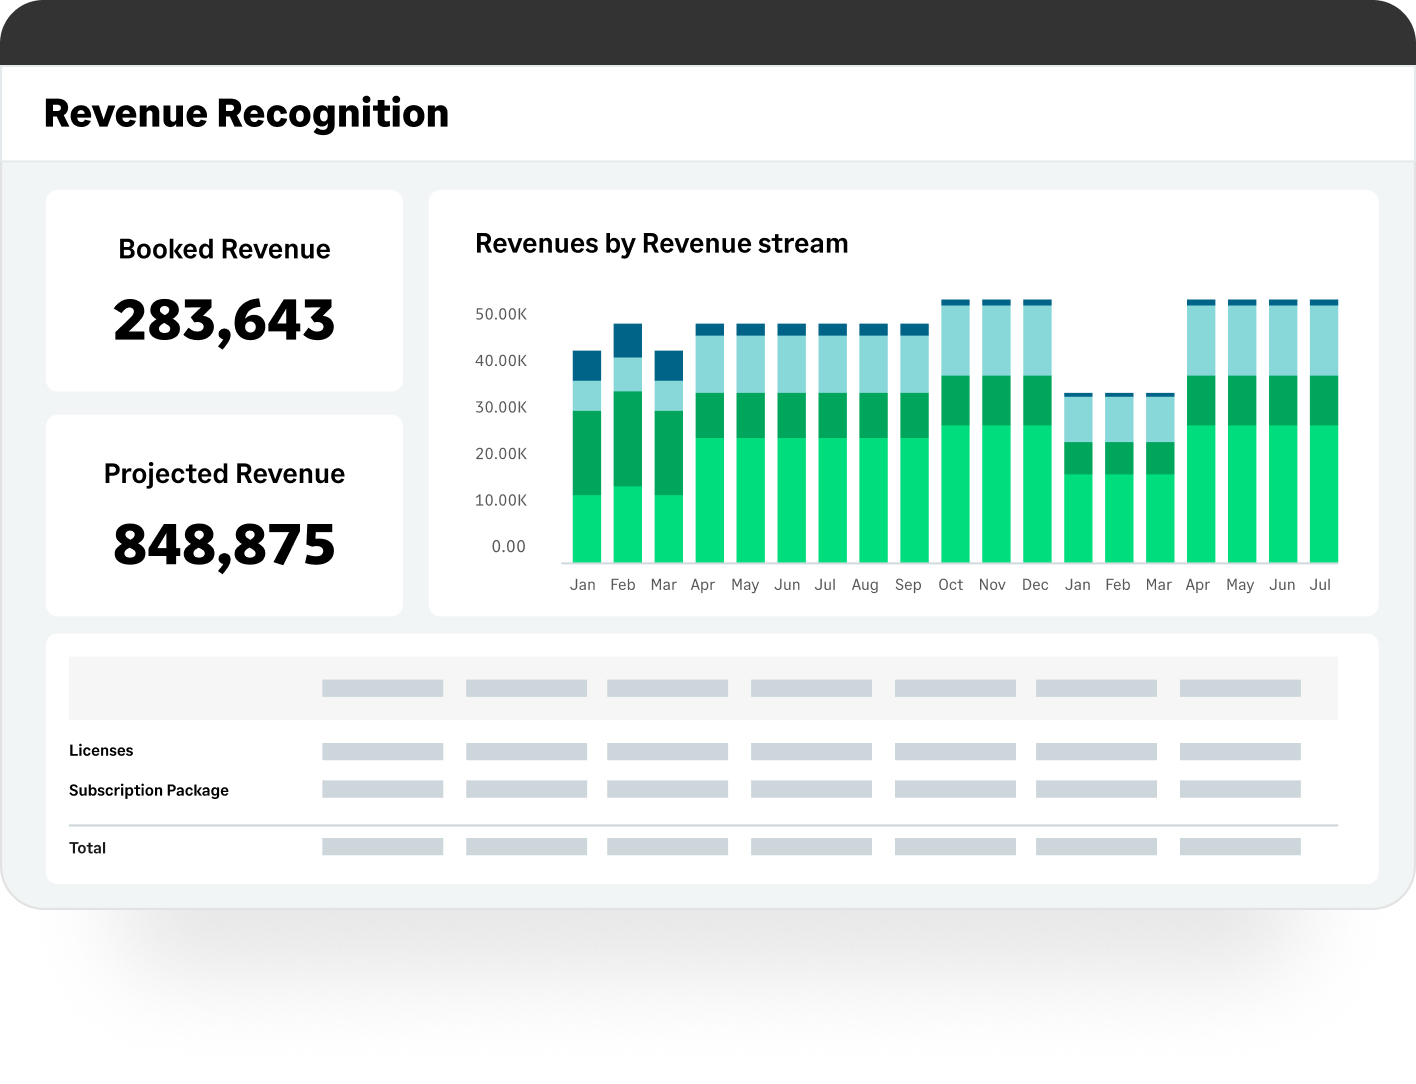 Revenue recognition data for a SaaS company.